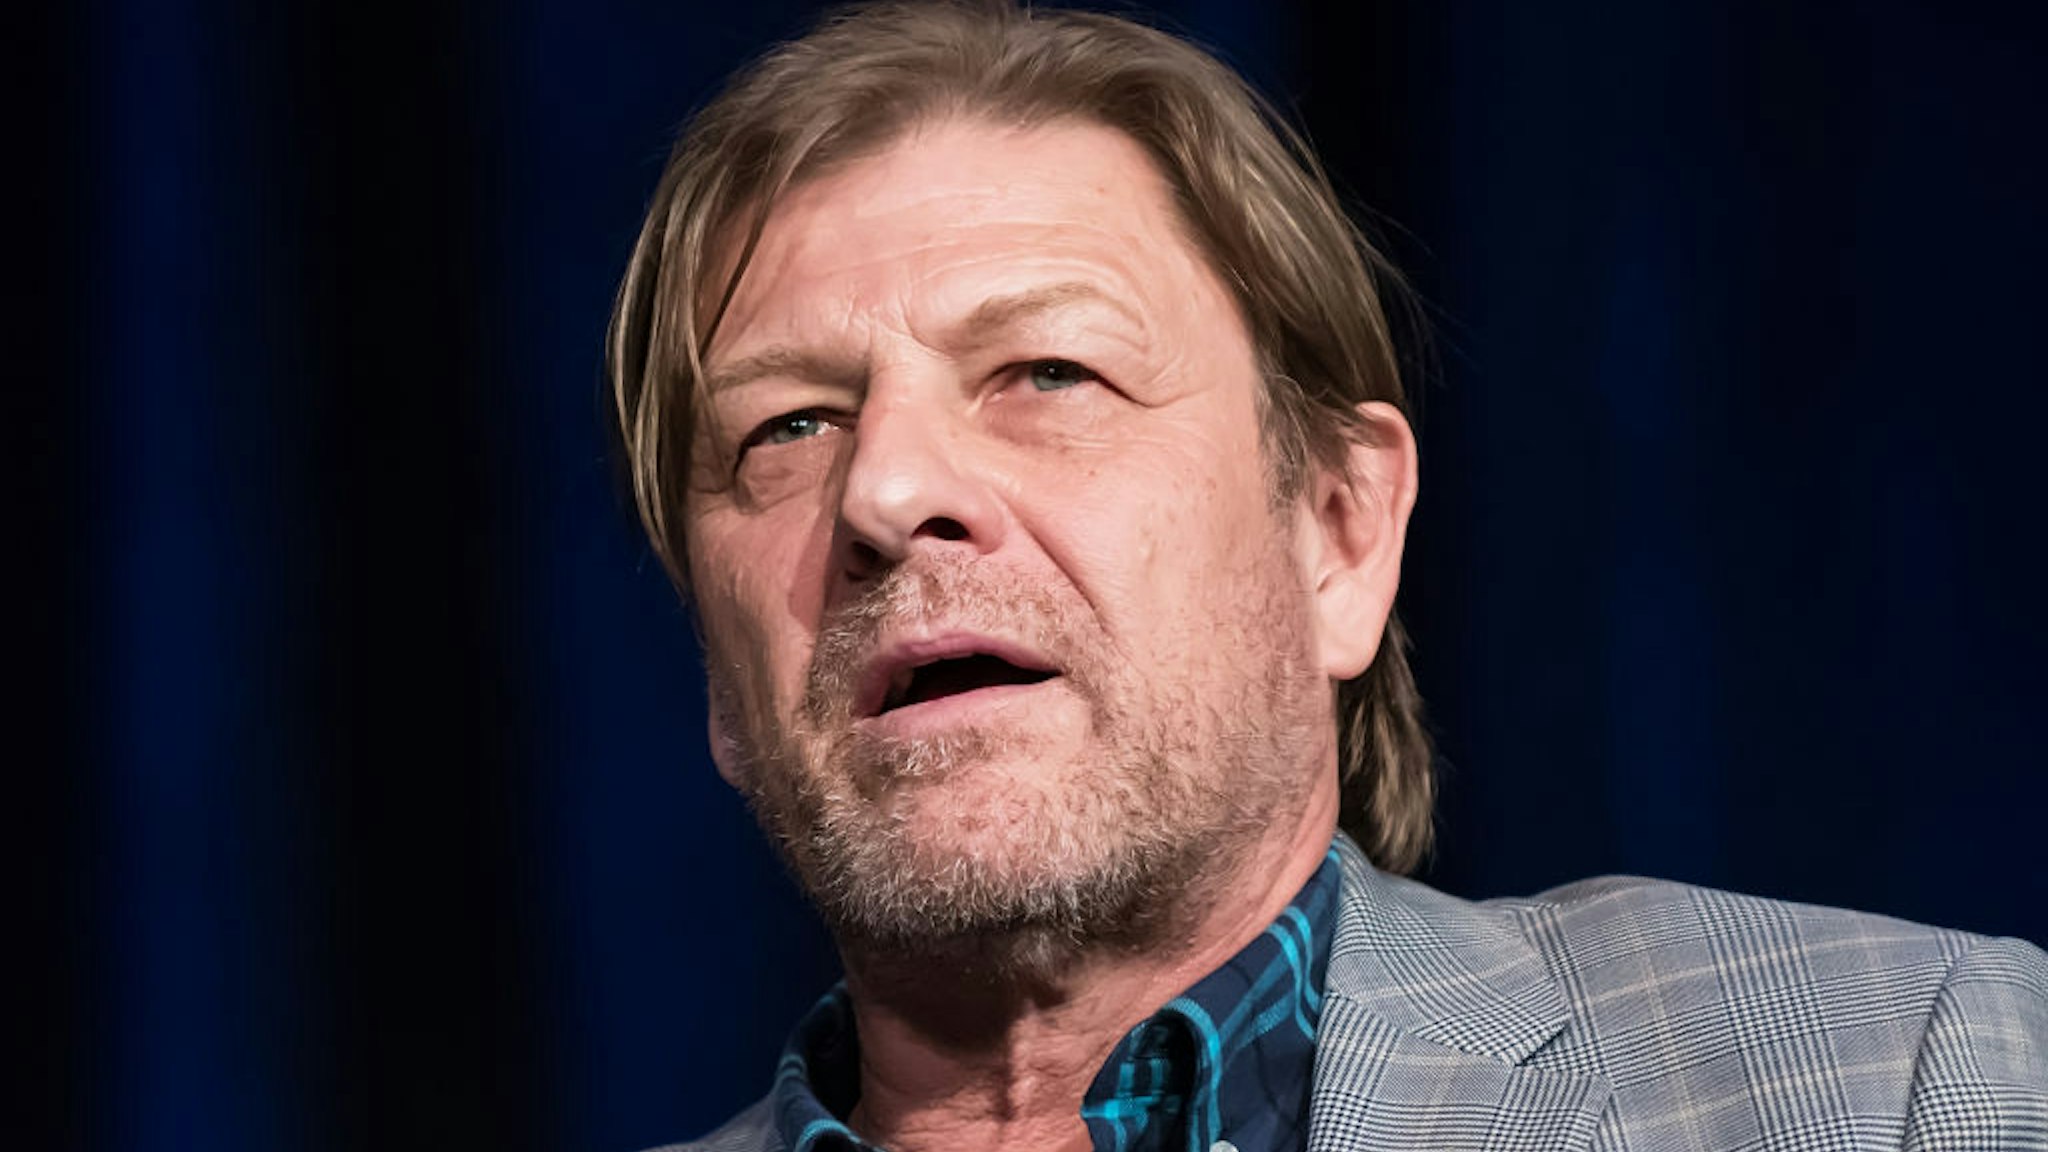 PHILADELPHIA, PA - MAY 19: Actor Sean Bean attends the 2018 Wizard World Comic Con at Pennsylvania Convention Center on May 19, 2018 in Philadelphia, Pennsylvania. (Photo by Gilbert Carrasquillo/Getty Images)